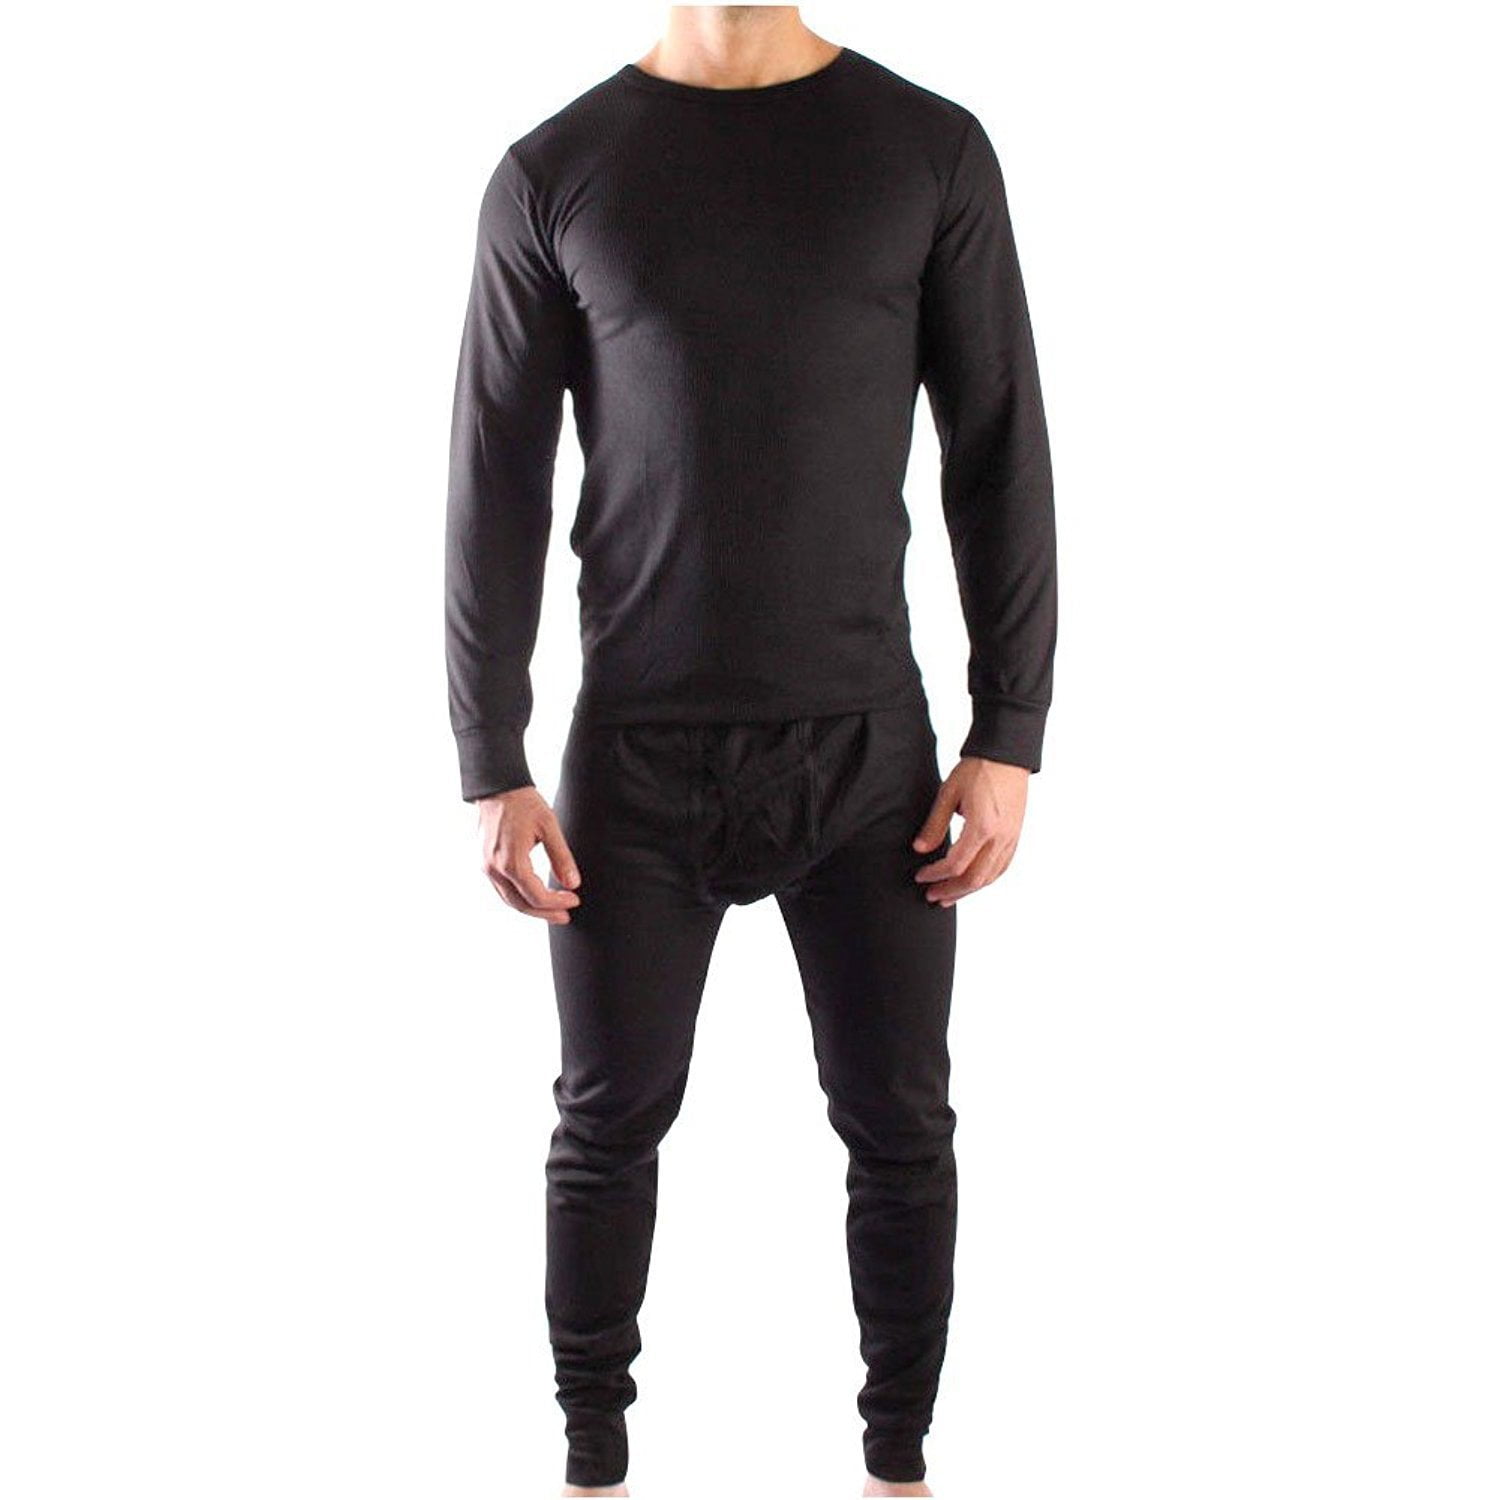 Details about   Mens Thermal Underwear Set T-Shirt & Trouser Long Johns Bottom Warm King Size 